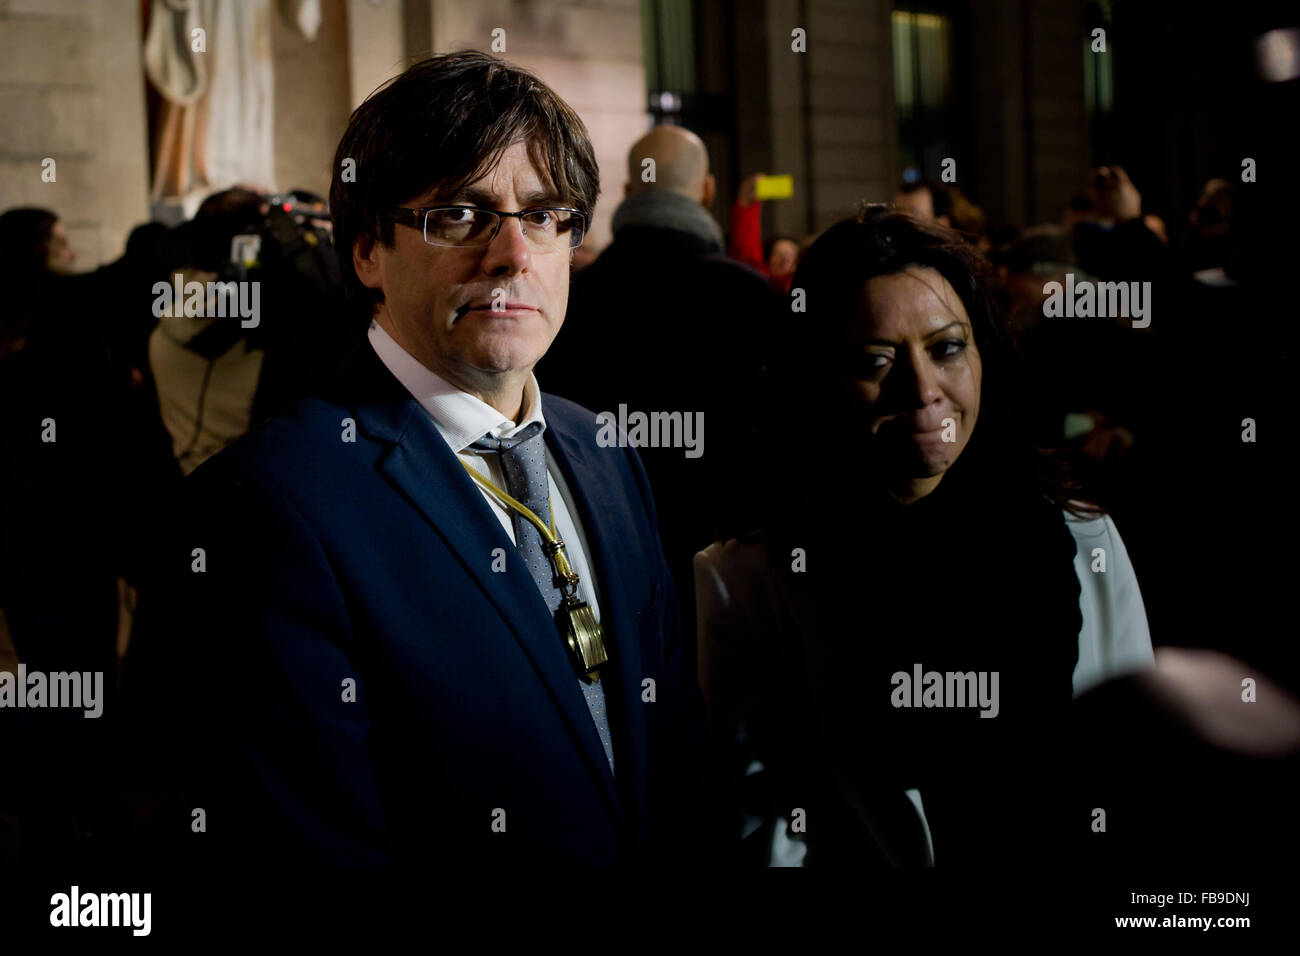 Barcelona, Spain. 12th January, 2016. Carles Puigdemont and his wife  Marcela Topor  are seen outside the Palau de la Generalitat (Catalan government headquarters)  after having been invested as a new president of Catalonia in Barcelona, Spain on 12 January, 2016. The new government of Catalonia has a secessionist plan that seeks independence from Spain and to proclaim the Catalan Republic in the next 18 months. Credit:   Jordi Boixareu/Alamy Live News Stock Photo